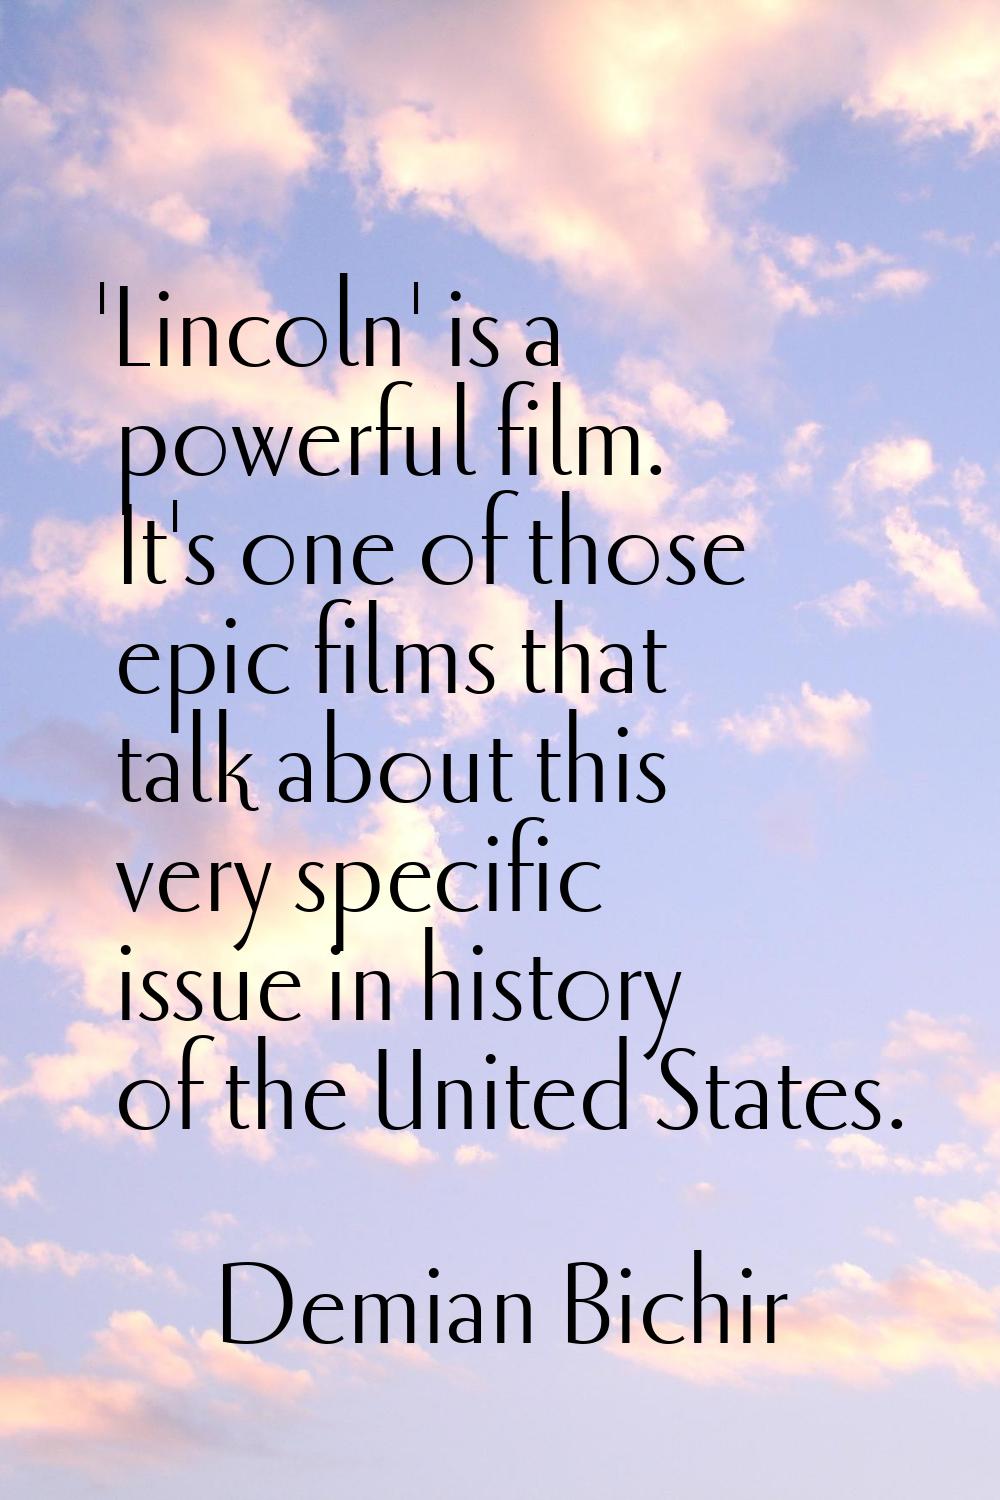 'Lincoln' is a powerful film. It's one of those epic films that talk about this very specific issue